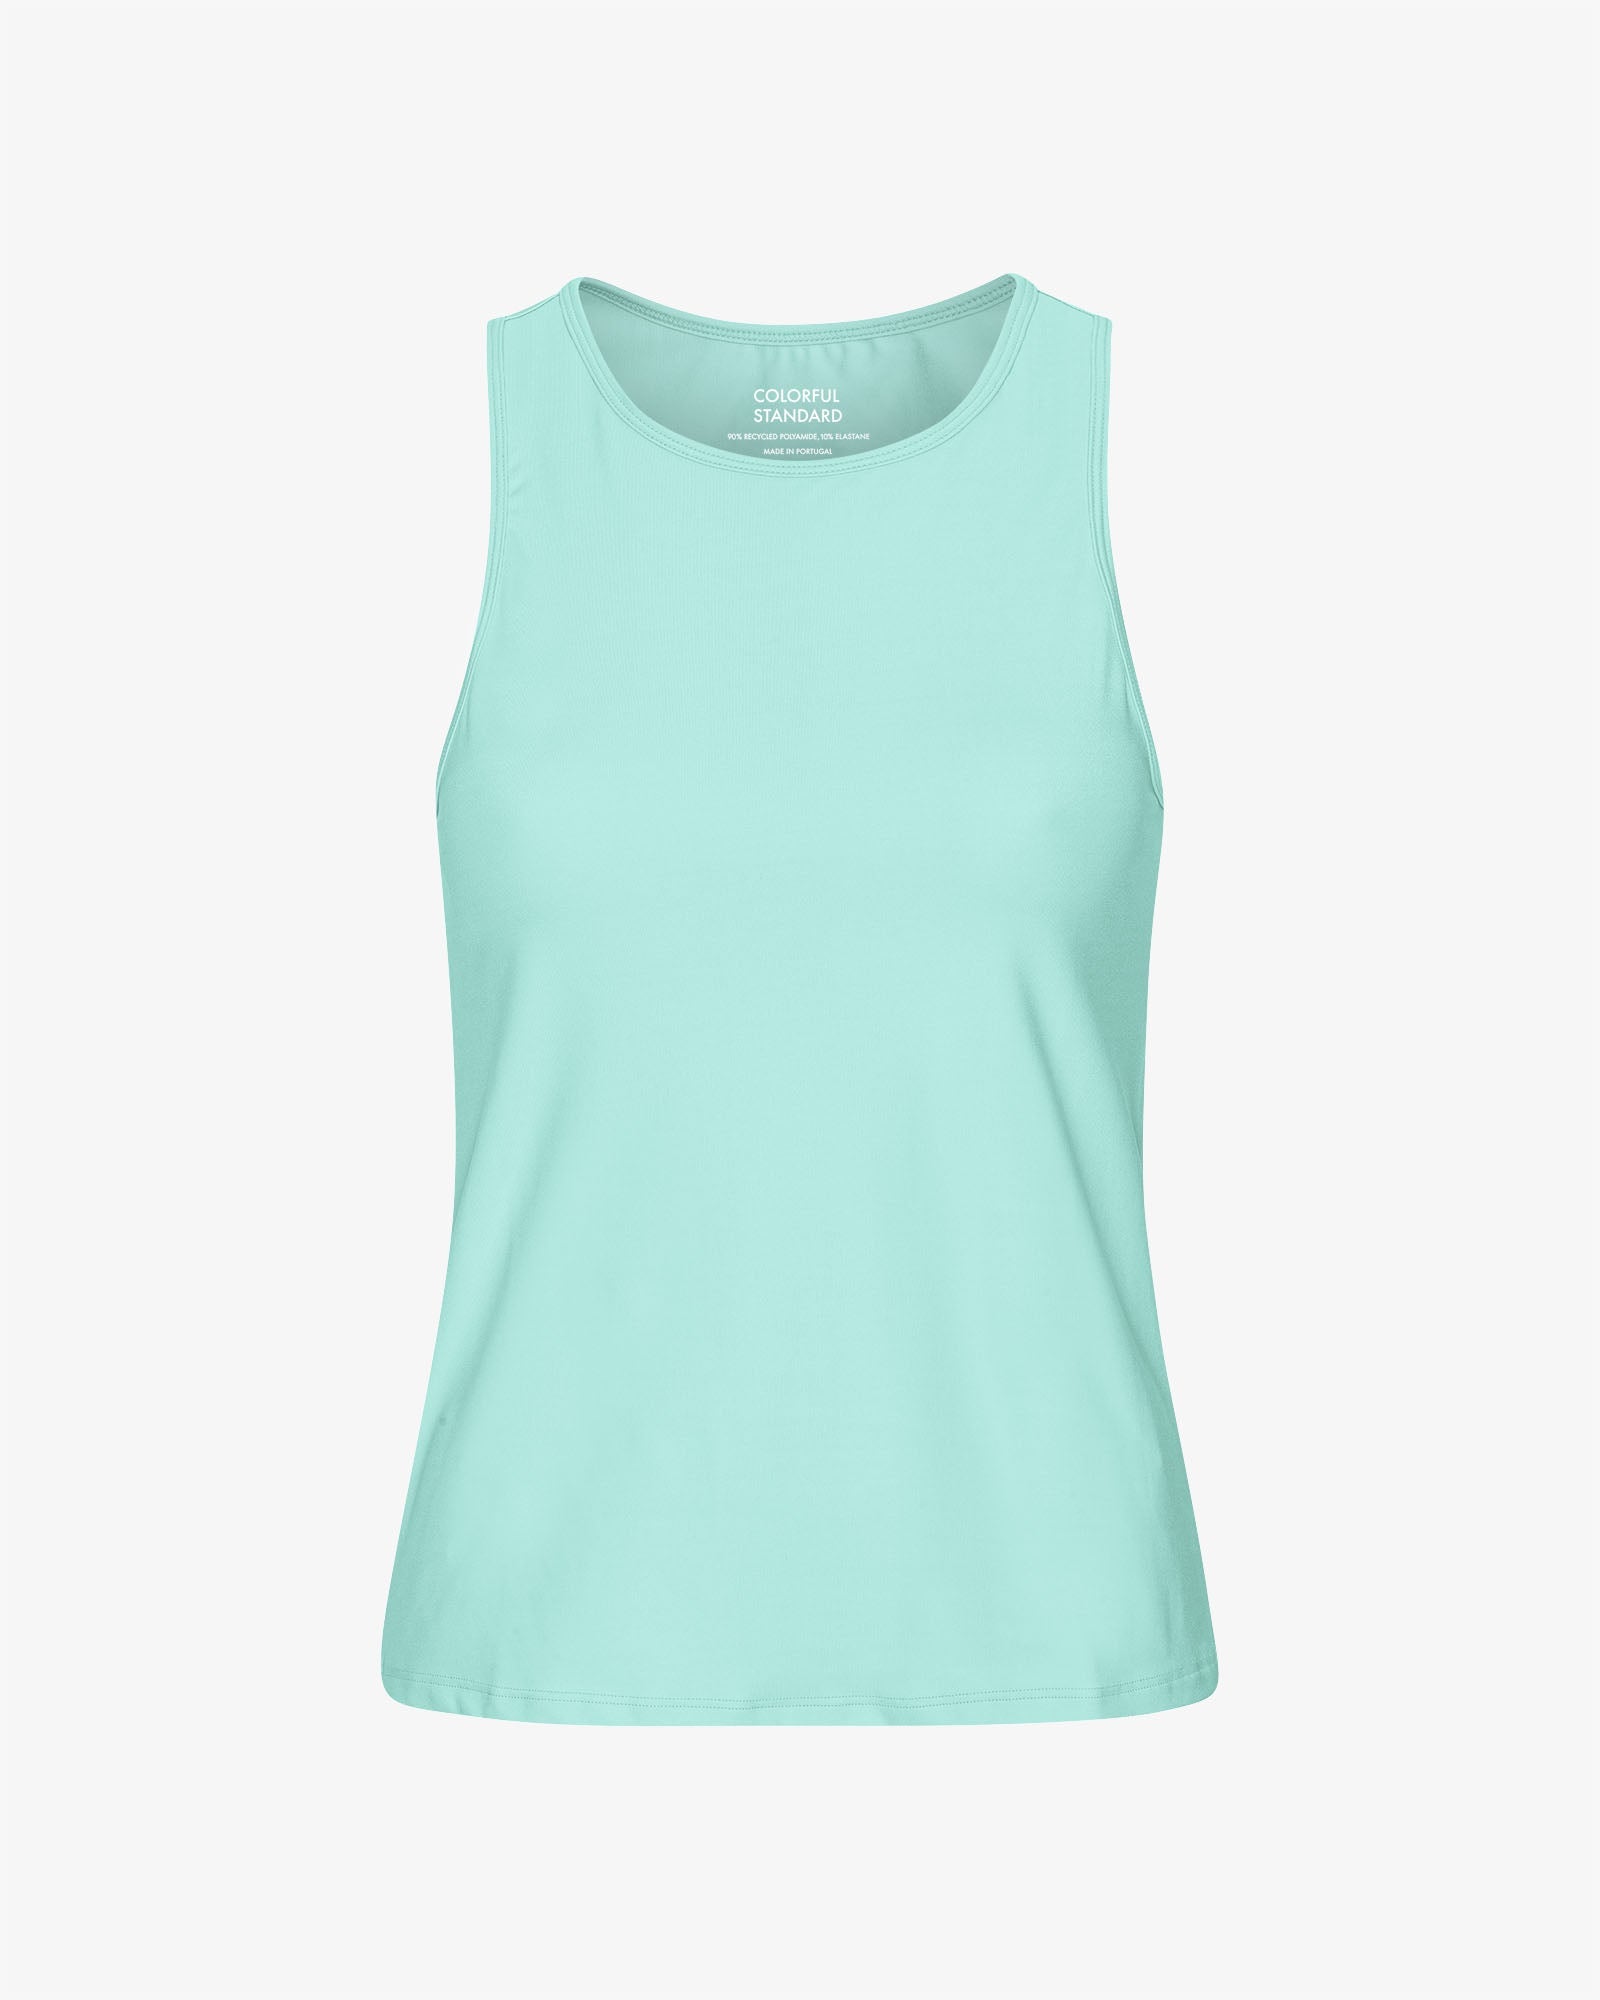 Colorful Standard Active Tank Top Teal Blue Front